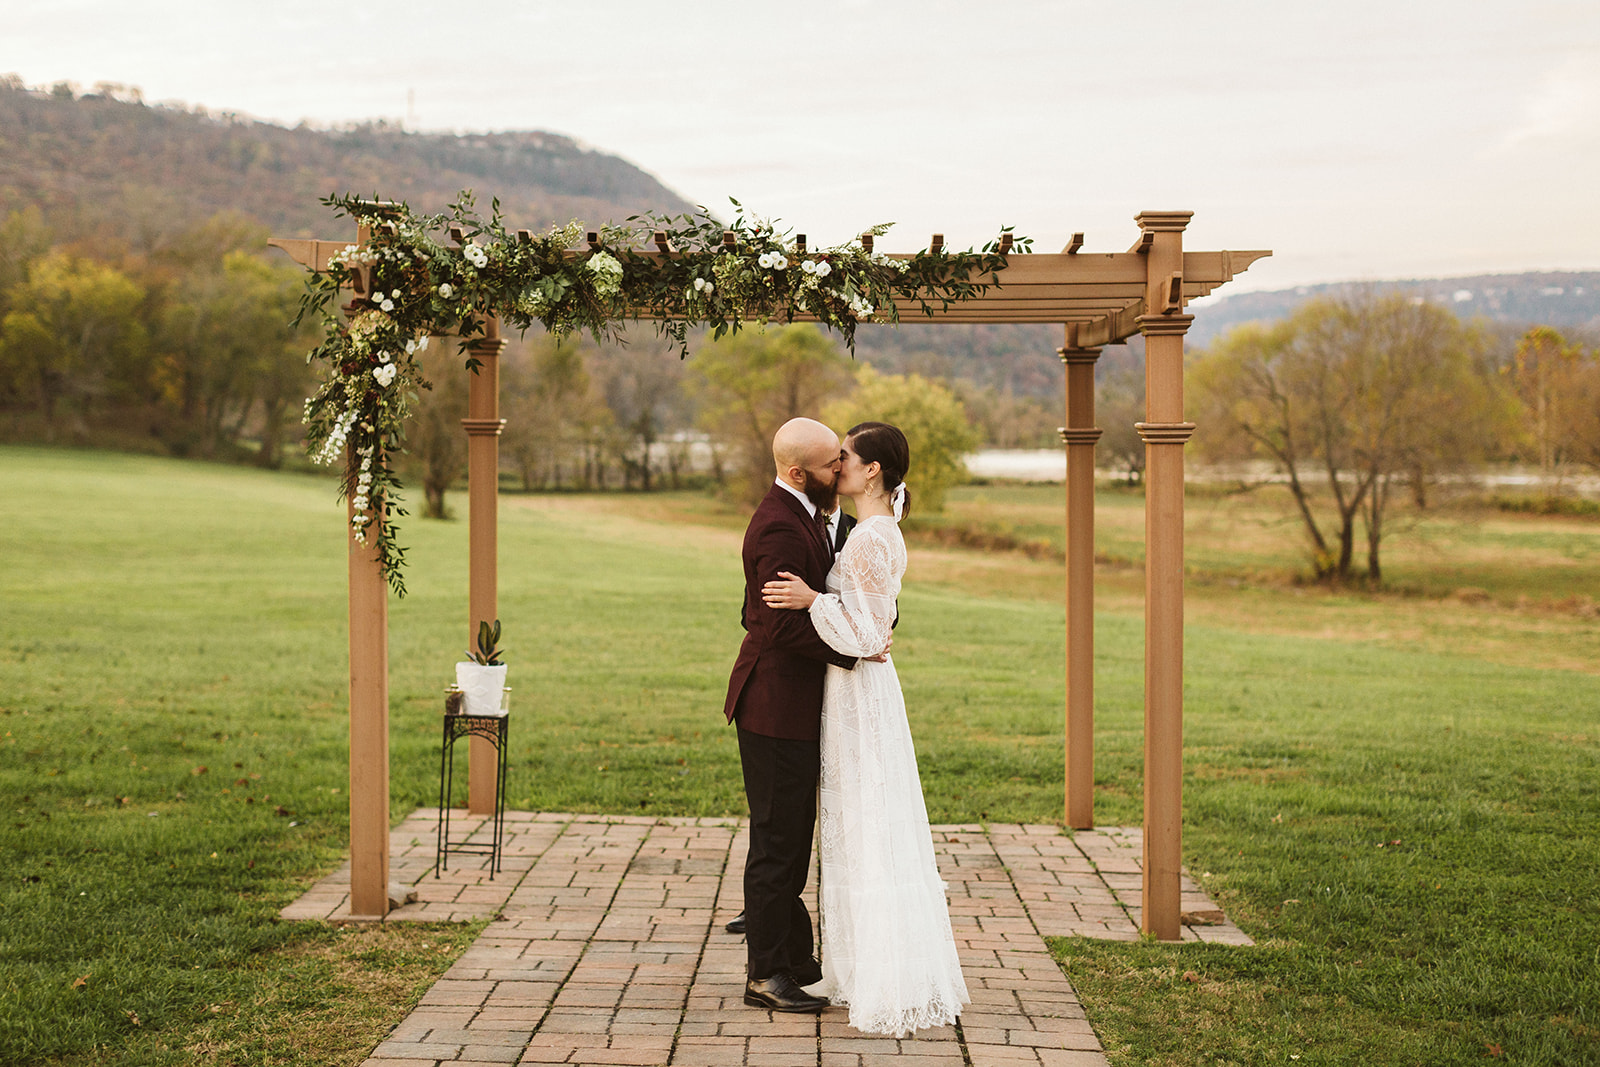 Groom kisses bride during their wedding ceremony at the Tennessee Riverplace